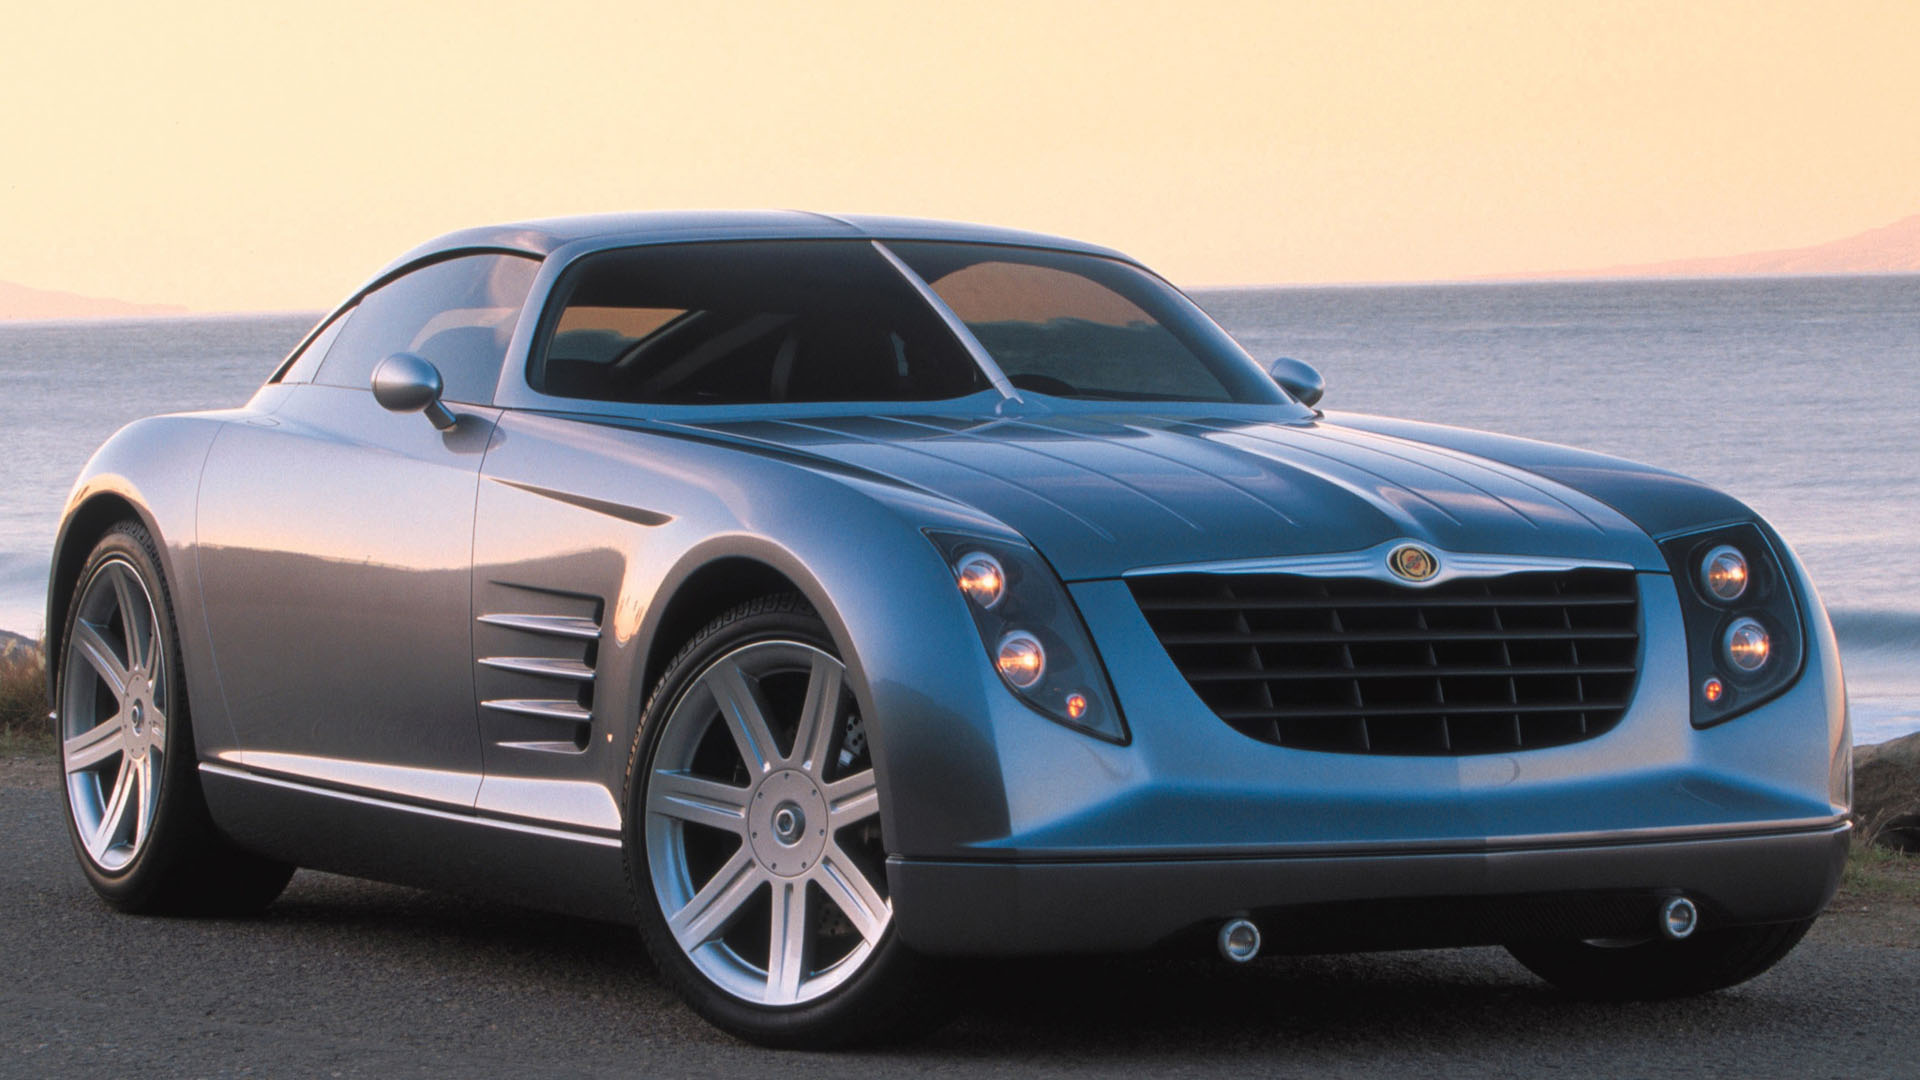 Chrysler Crossfire Concept Car Coupe Fastback Silver Sport Car 2K Cars